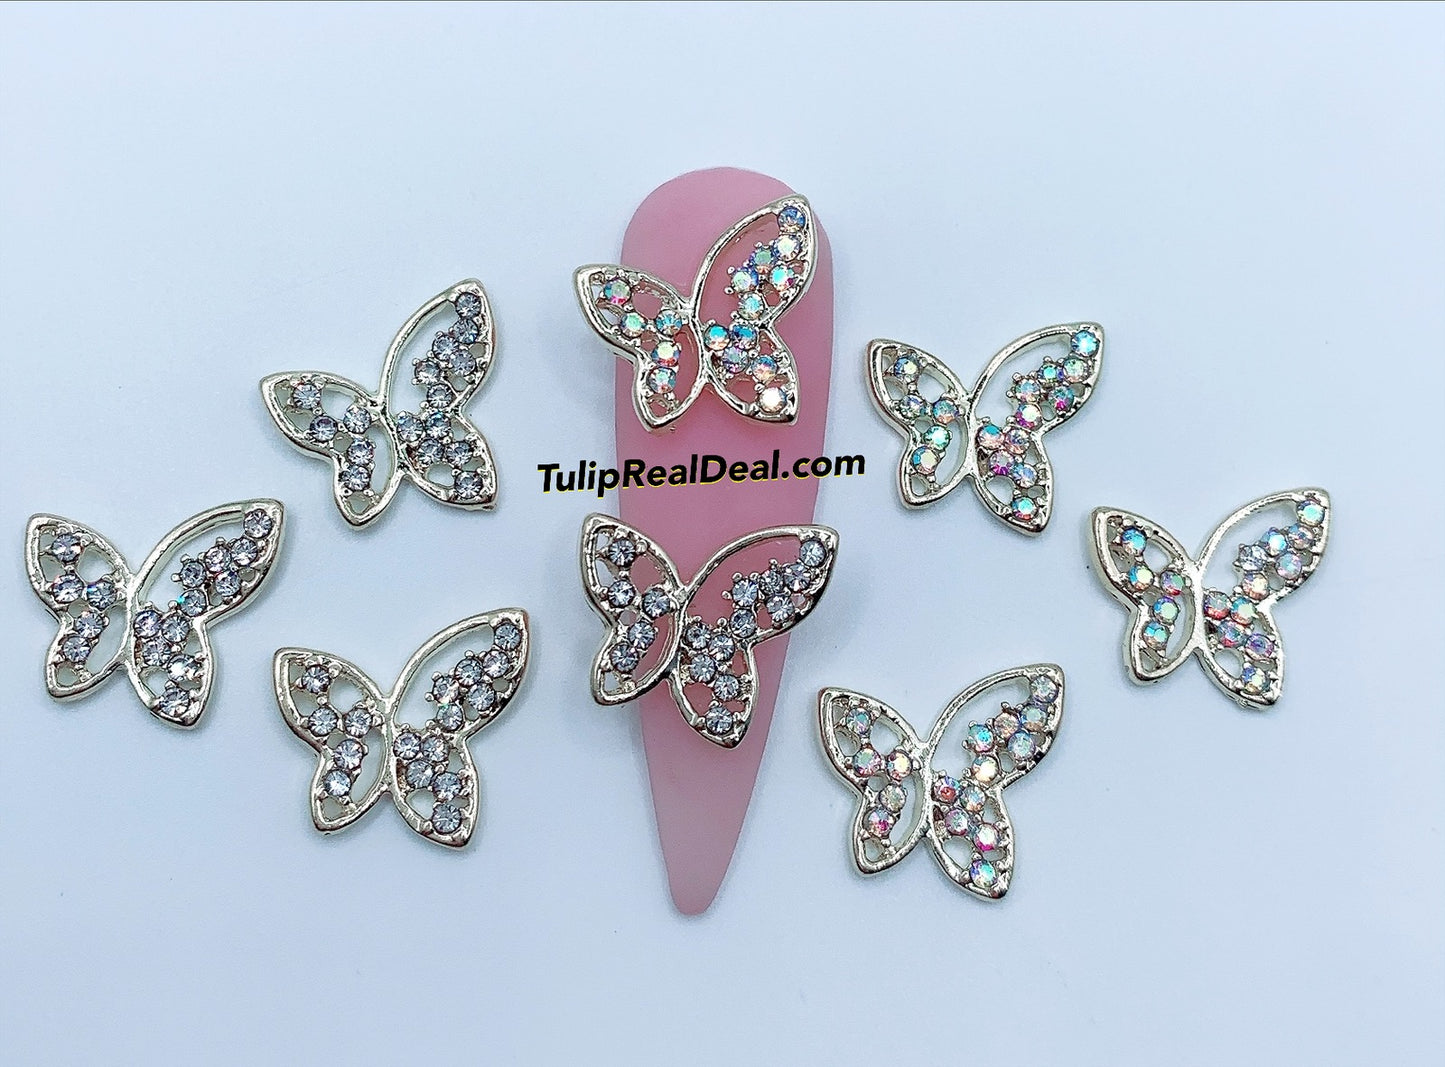 Butterfly Bling 3D charm 1 piece